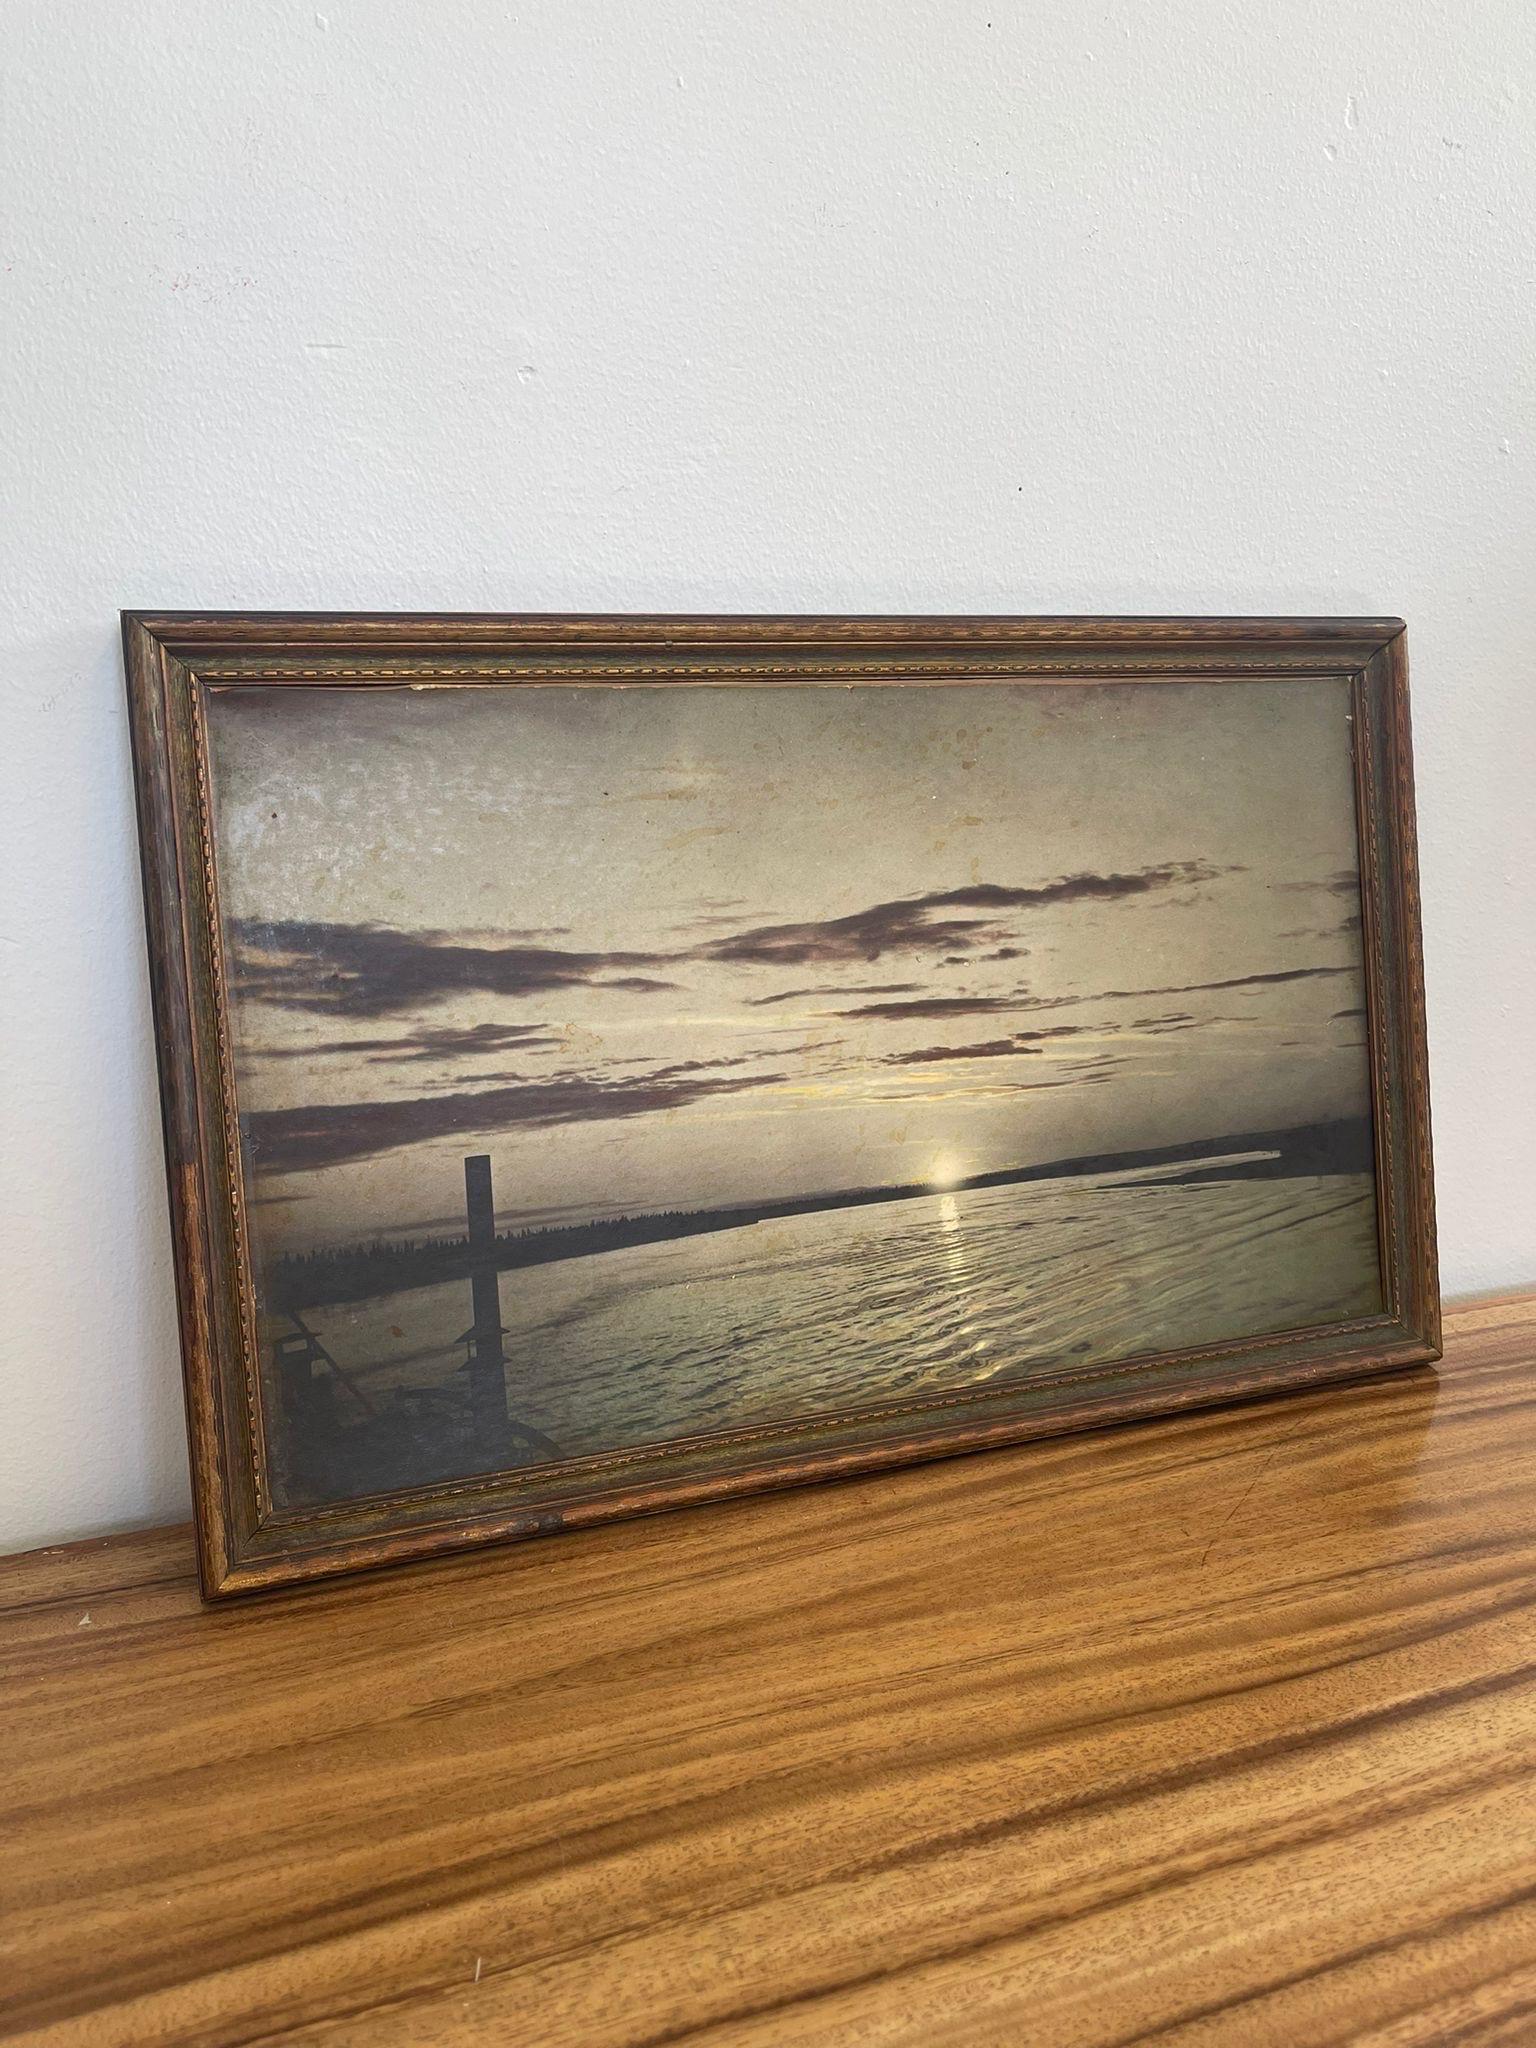 This Piece has aged beautifully, gorgeous Patina throughout. Within wooden framing. Vintage Condition Consistent with Age as Pictured.

Dimensions. 22 W ; 1/2 D ; 13 1/2 H